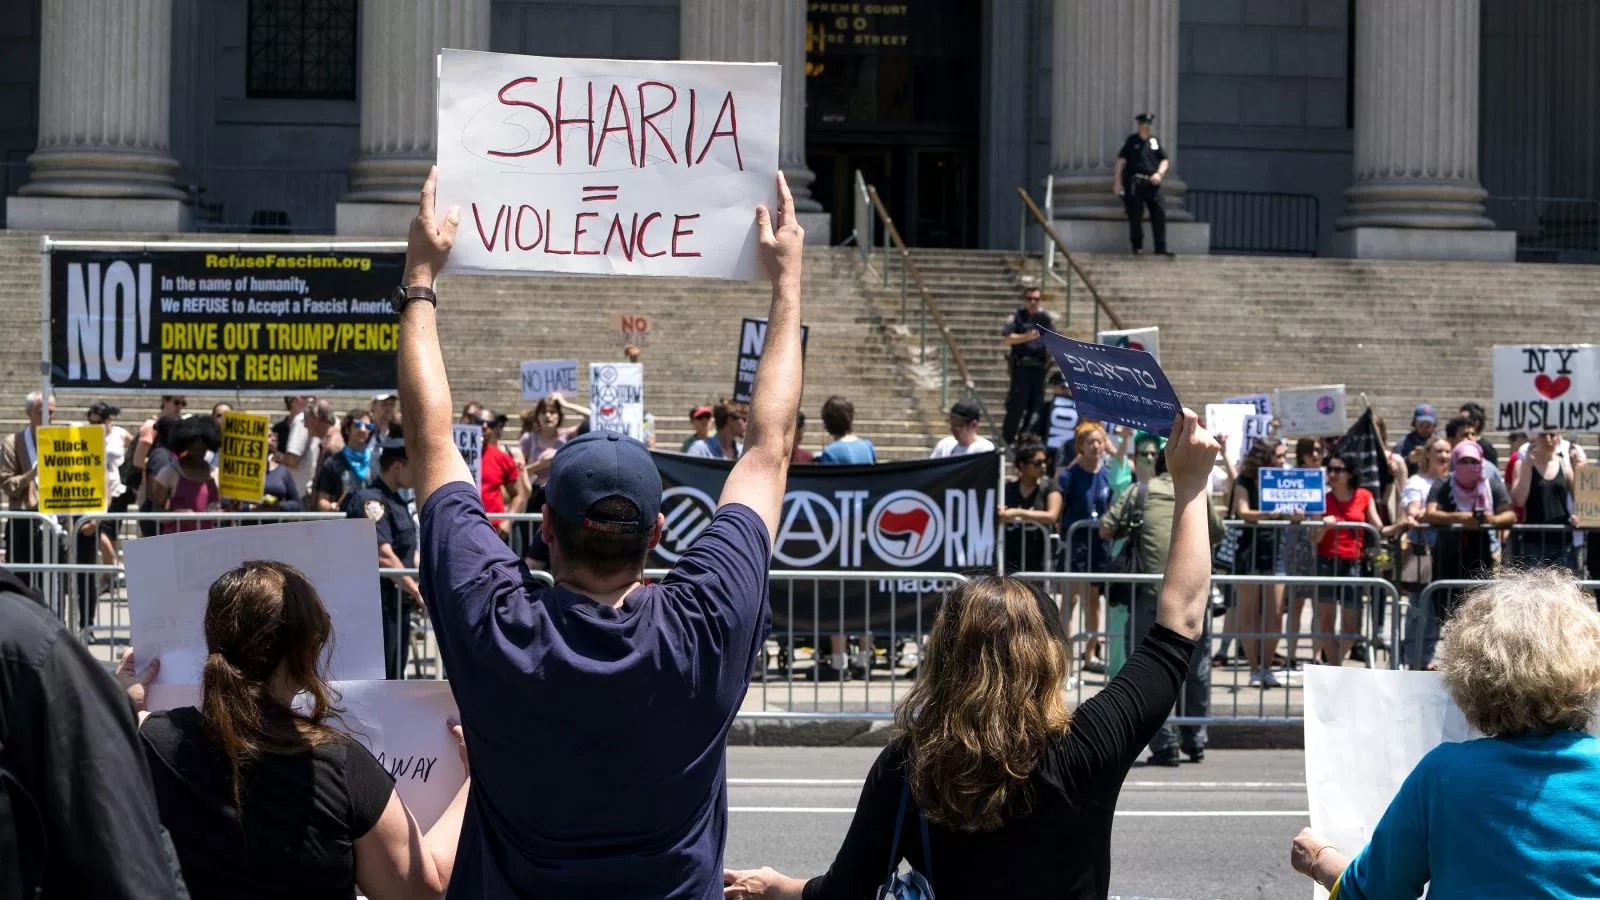 Marriott is hosting the conference of the largest anti-Muslim hate group